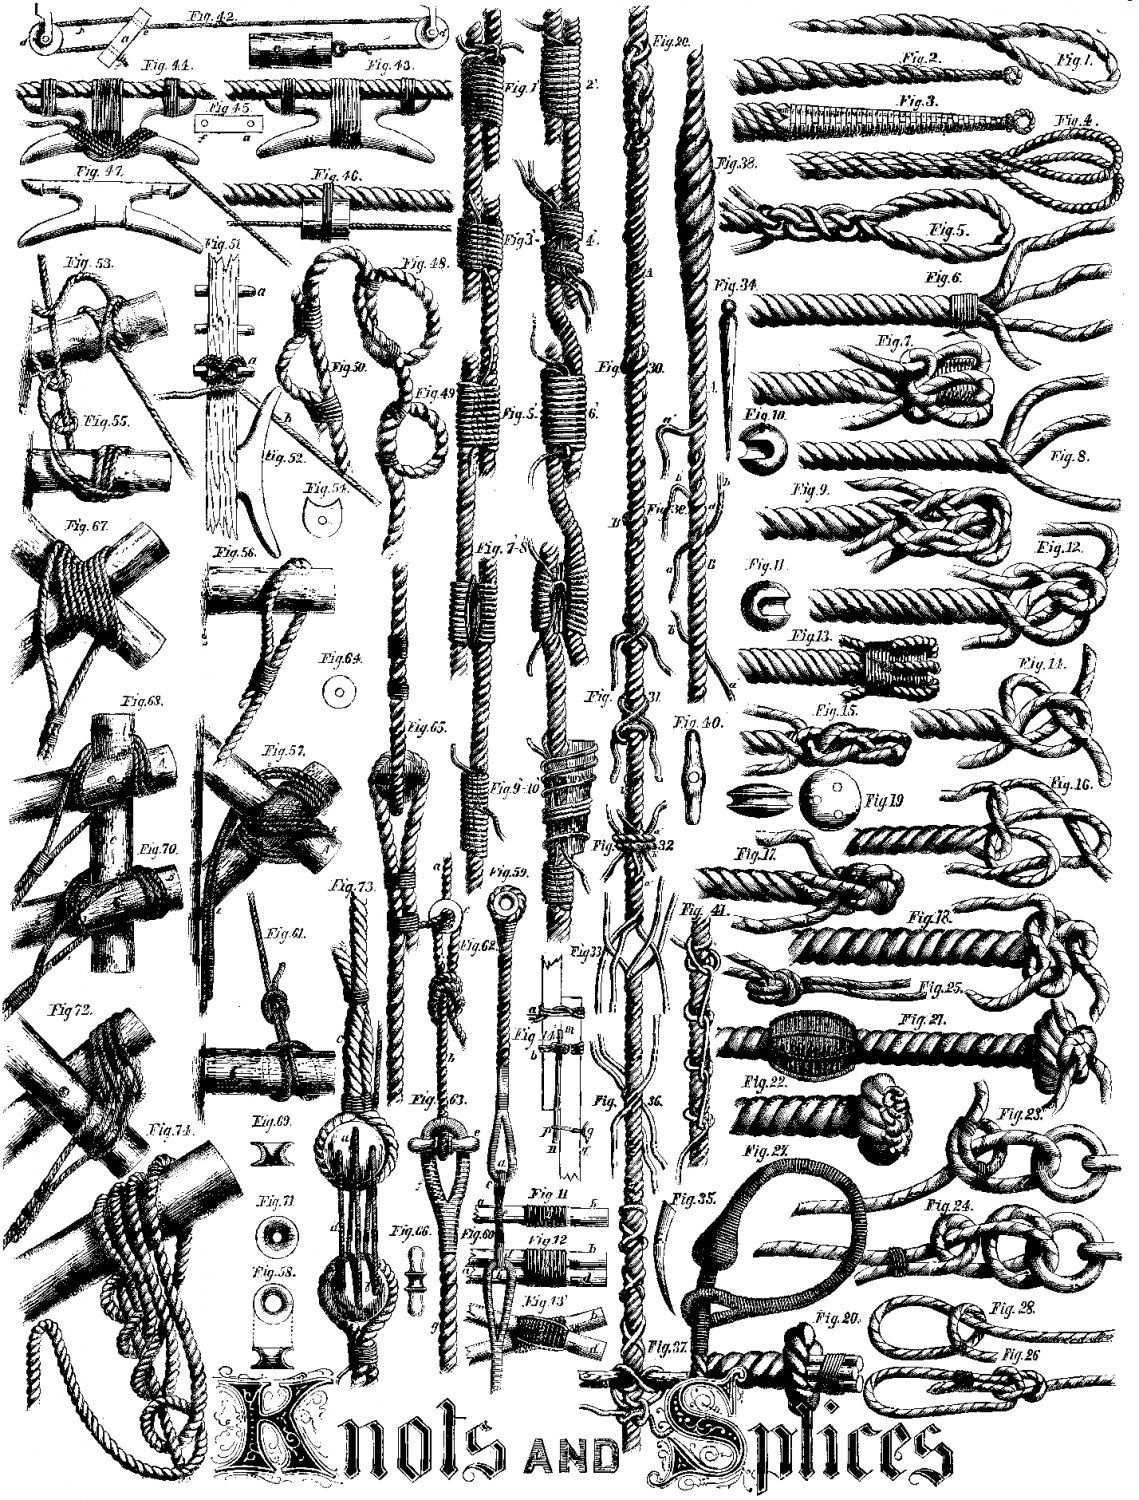 Knots and Splices Chart  18"x28" (45cm/70cm) Poster